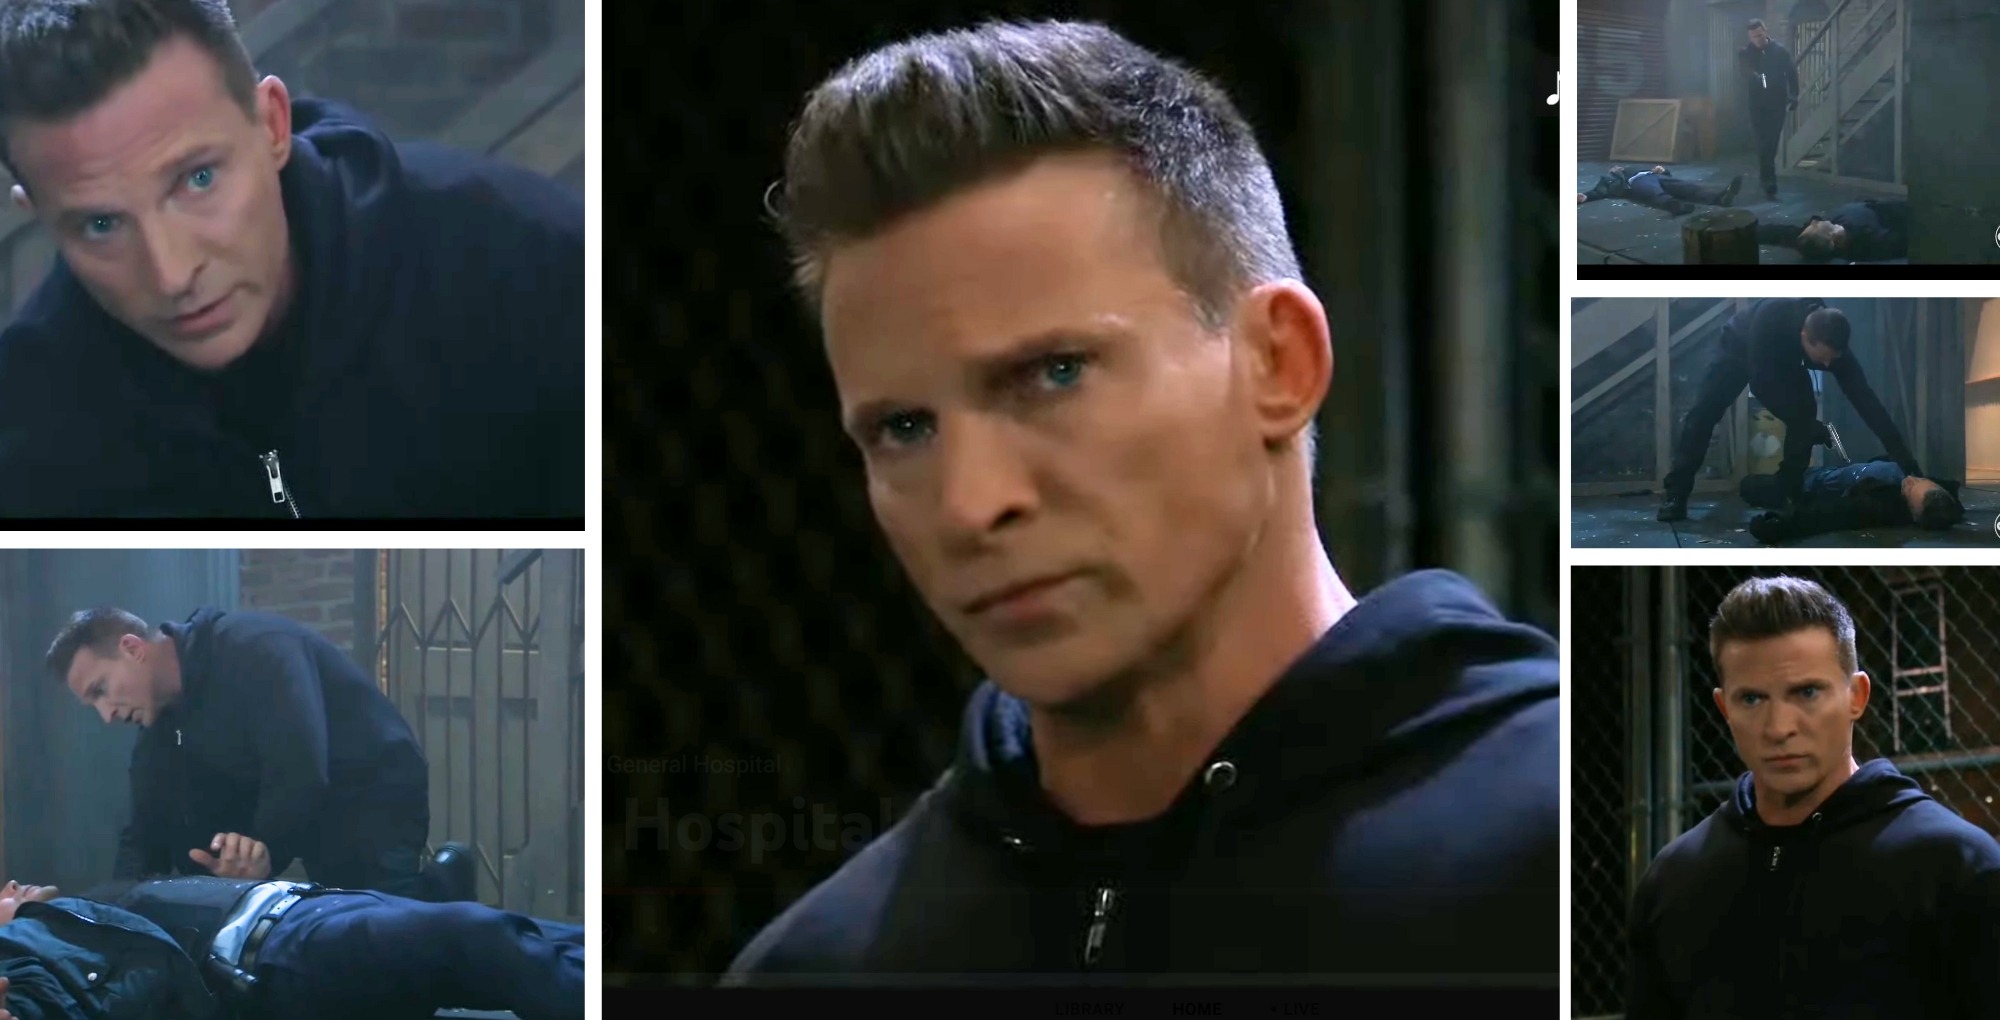 jason morgan in his general hospital return on monday, march 4.